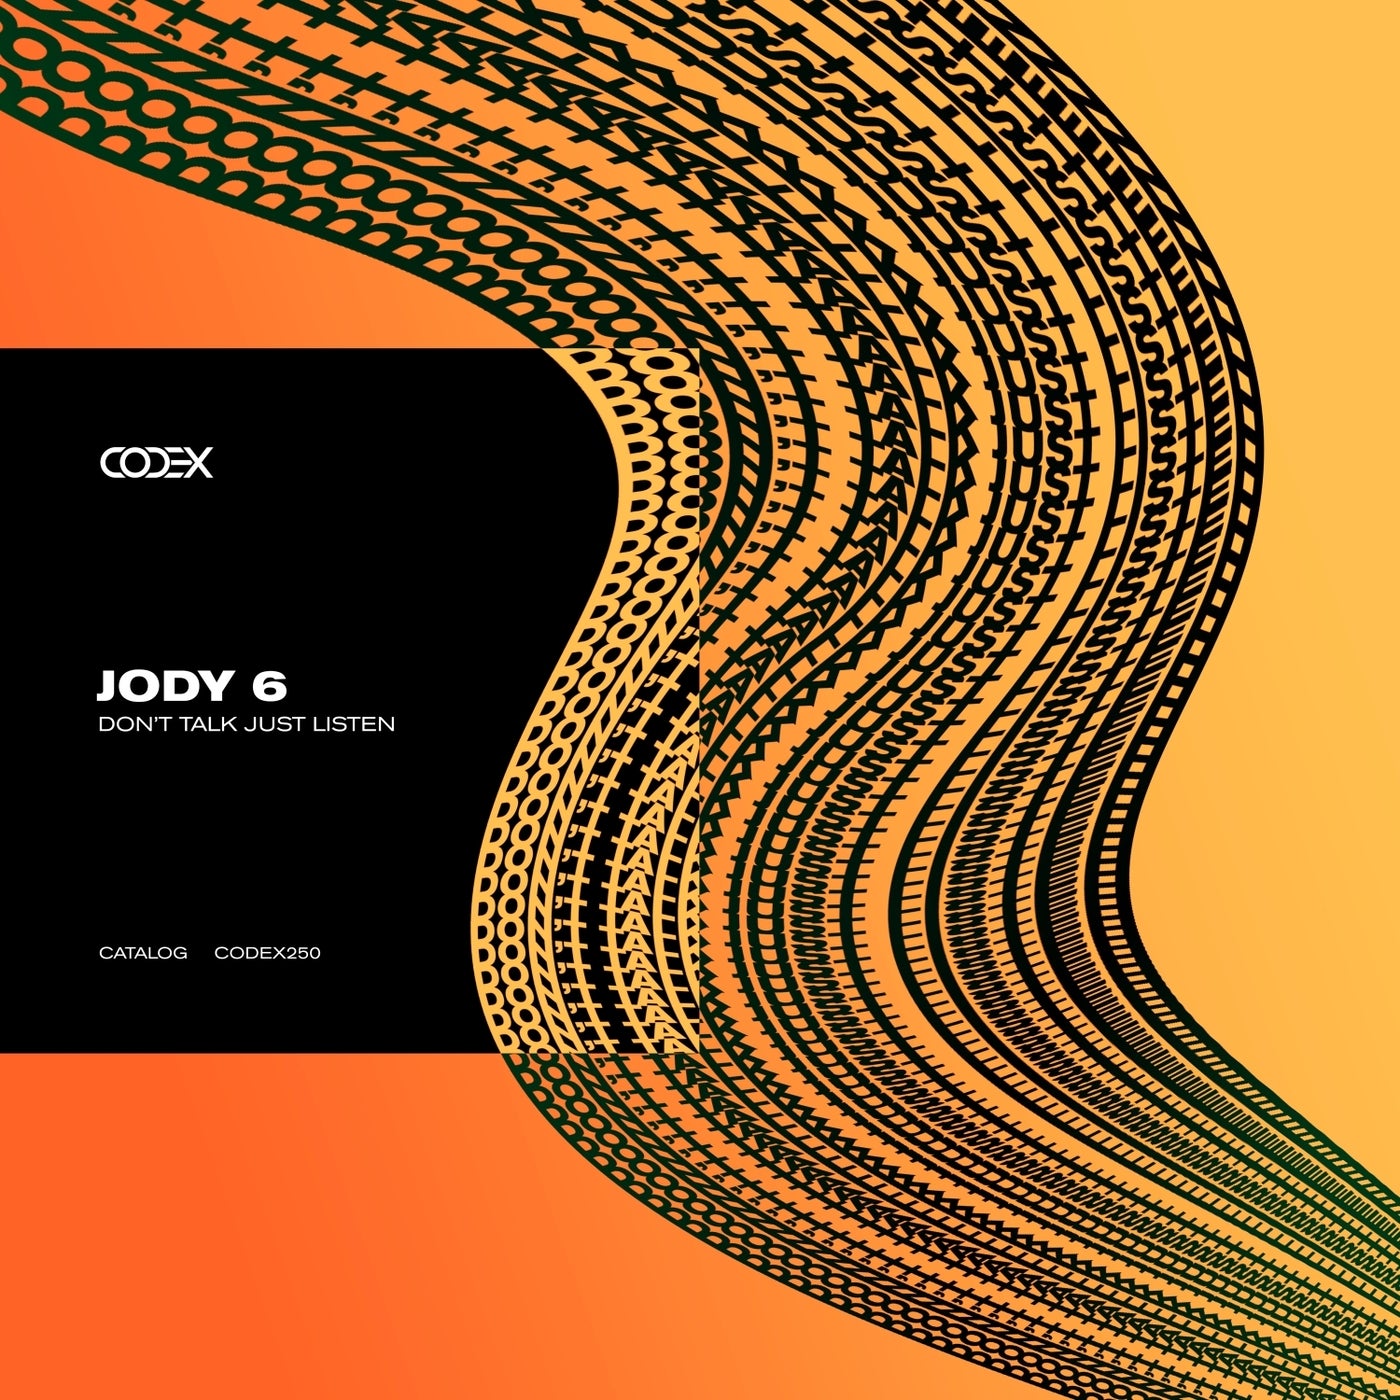 image cover: Jody 6 - Don't Talk Just Listen on Codex Recordings